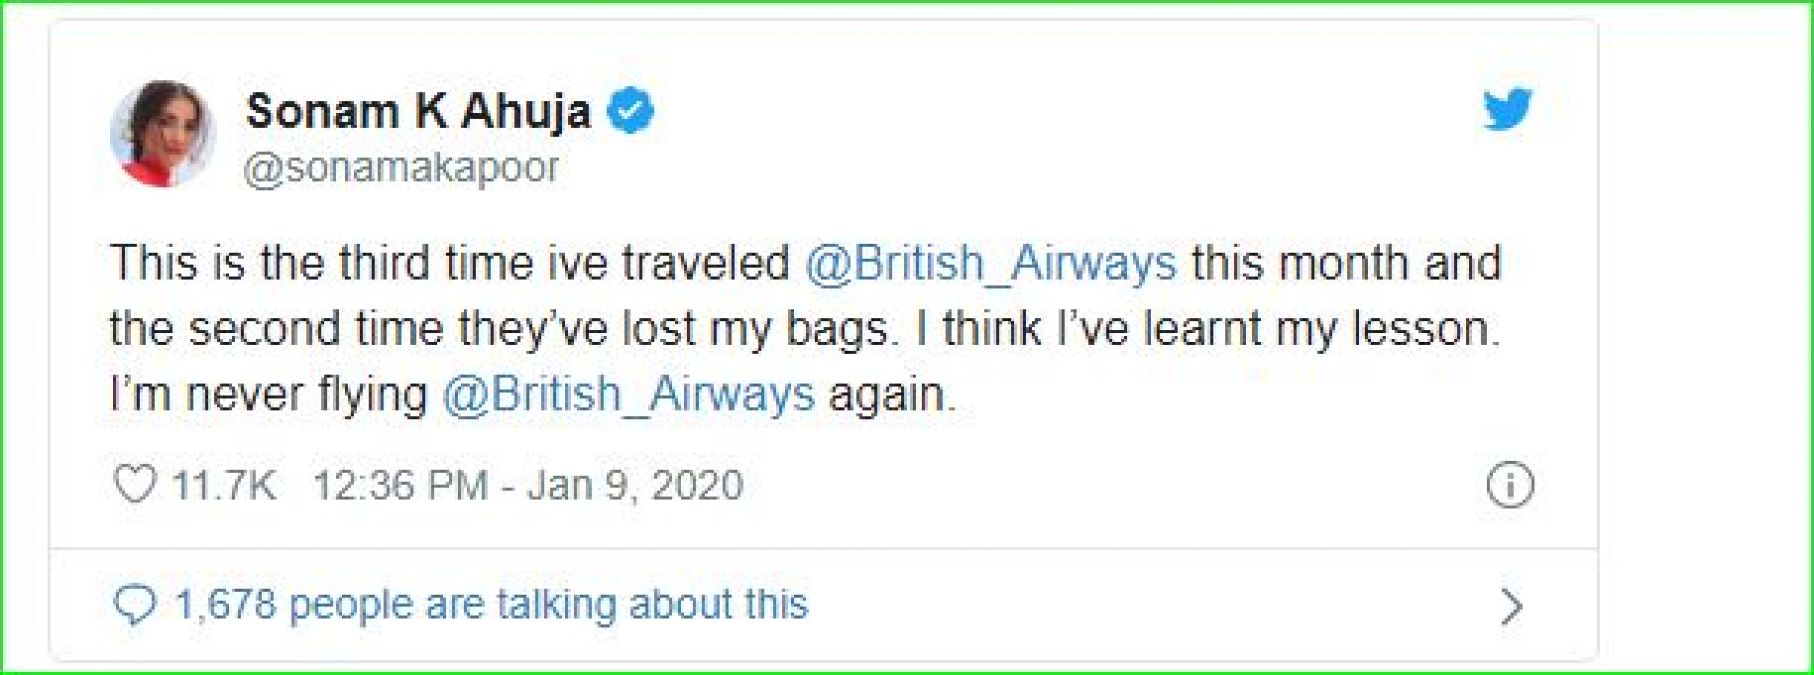 Sonam Kapoor Is Furious After British Airways Lost Her Luggage 'Second Time This Month'